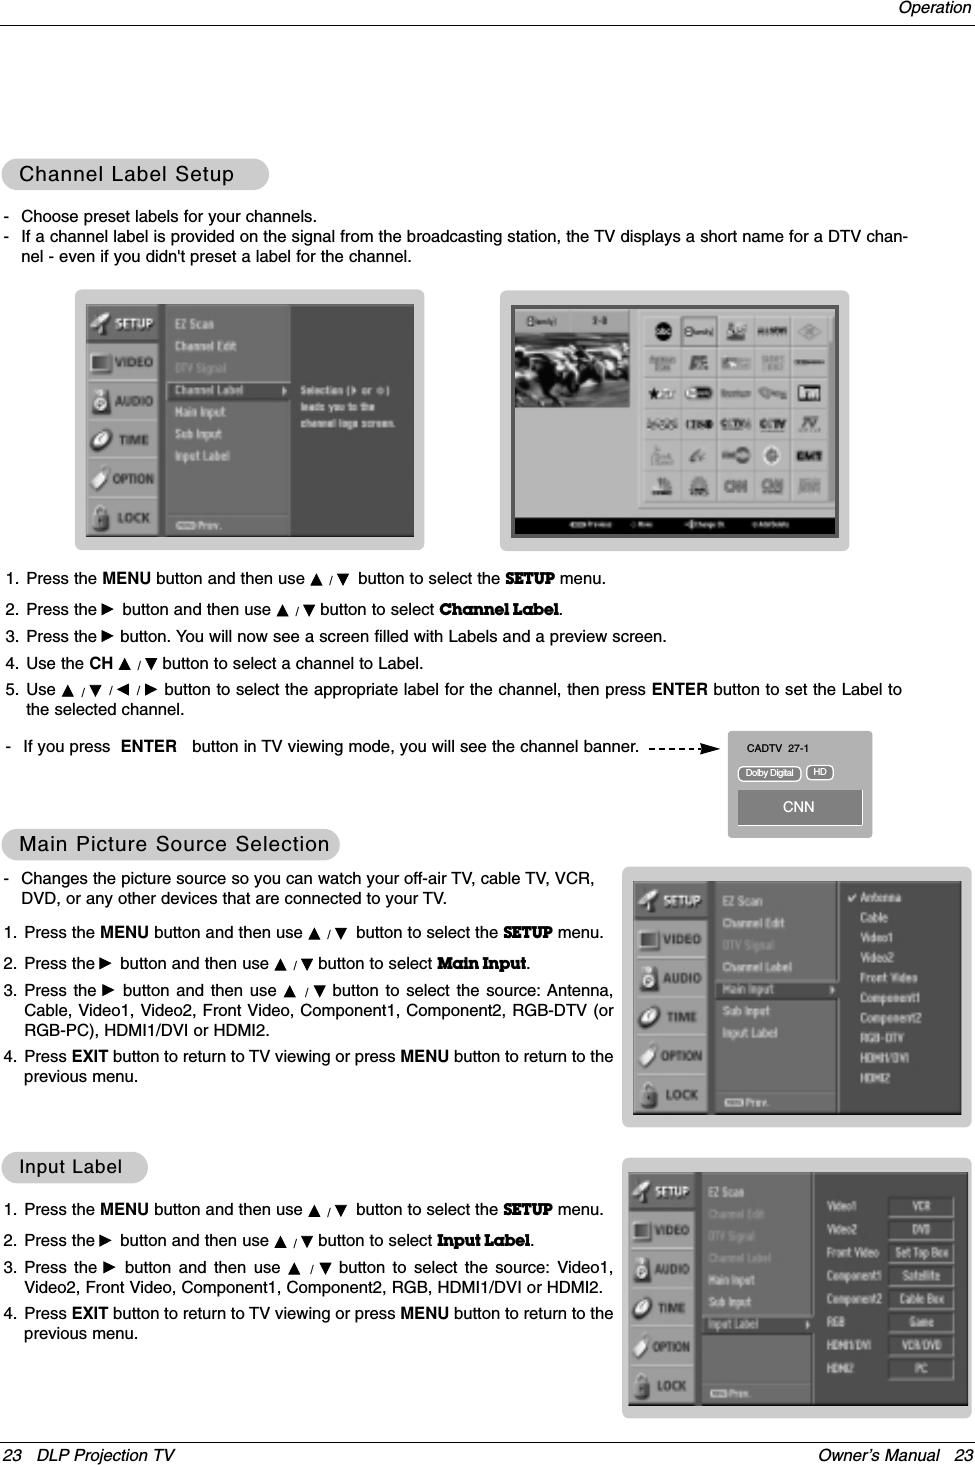 23 DLP Projection TV Owner’s Manual   23Operation- Changes the picture source so you can watch your off-air TV, cable TV, VCR,DVD, or any other devices that are connected to your TV. 1. Press the MENU button and then use D / Ebutton to select the SETUP menu.2. Press the Gbutton and then use D / Ebutton to select Main Input.3. Press the Gbutton and then use D  /  Ebutton to select the source: Antenna,Cable, Video1, Video2, Front Video, Component1, Component2, RGB-DTV (orRGB-PC), HDMI1/DVI or HDMI2.4. Press EXIT button to return to TV viewing or press MENU button to return to theprevious menu.Main Picture Source SelectionMain Picture Source Selection1. Press the MENU button and then use D / Ebutton to select the SETUP menu.2. Press the Gbutton and then use D / Ebutton to select Input Label.3. Press the Gbutton and then use D  /  Ebutton to select the source: Video1,Video2, Front Video, Component1, Component2, RGB, HDMI1/DVI or HDMI2.4. Press EXIT button to return to TV viewing or press MENU button to return to theprevious menu.Input LabelInput Label- Choose preset labels for your channels. - If a channel label is provided on the signal from the broadcasting station, the TV displays a short name for a DTV chan-nel - even if you didn&apos;t preset a label for the channel.1. Press the MENU button and then use D / Ebutton to select the SETUP menu.2. Press the Gbutton and then use D / Ebutton to select Channel Label.3. Press the Gbutton. You will now see a screen filled with Labels and a preview screen.4. Use the CH D / Ebutton to select a channel to Label. 5. Use D / E/ F / G  button to select the appropriate label for the channel, then press ENTER button to set the Label tothe selected channel.- If you press  ENTER button in TV viewing mode, you will see the channel banner. Channel Label SetupChannel Label SetupCADTV 27-1CNNDolby Digital HD